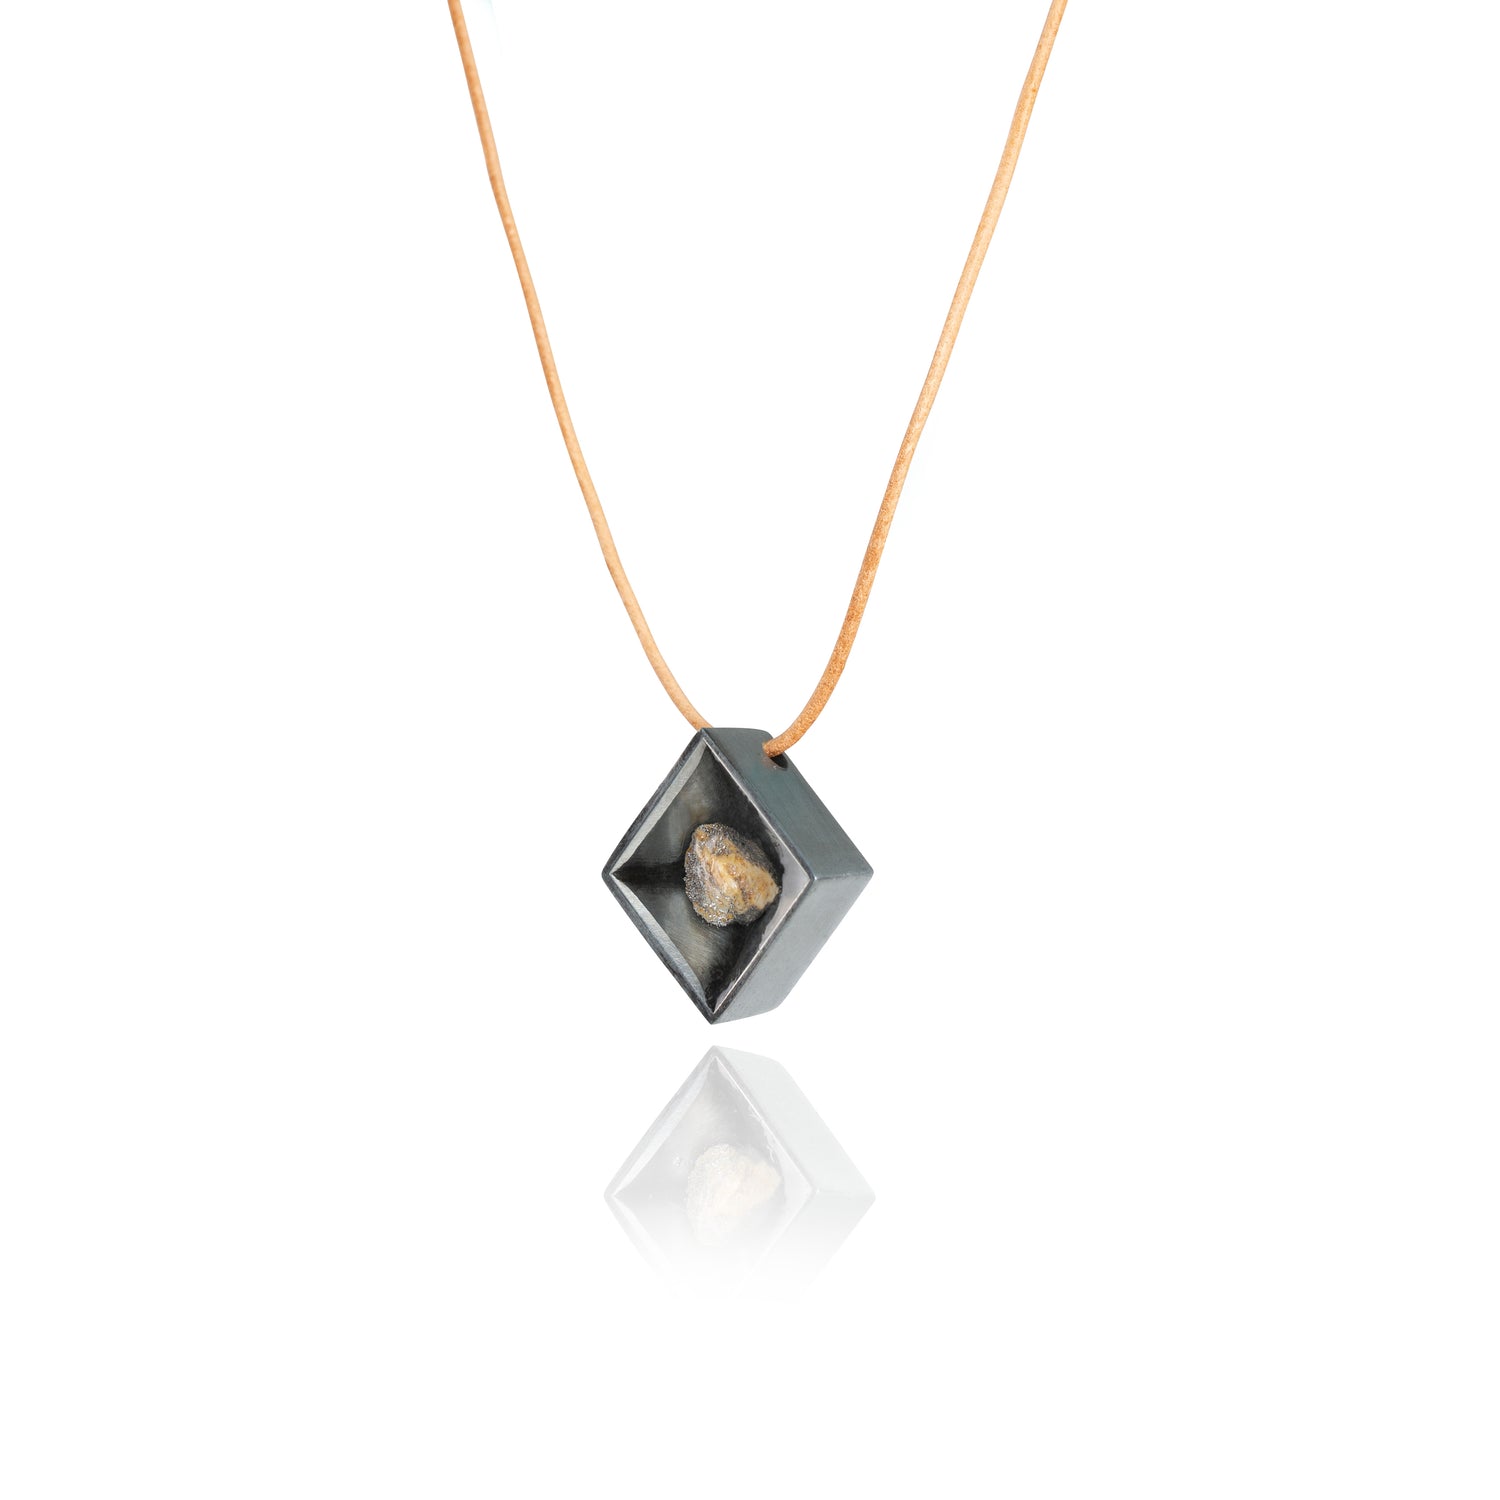 A side view of a small natural multicolored stone sitting in the middle of a diamond shaped metal pendant in a dark silver color. The pendant is hanging on a tan leather necklace. 